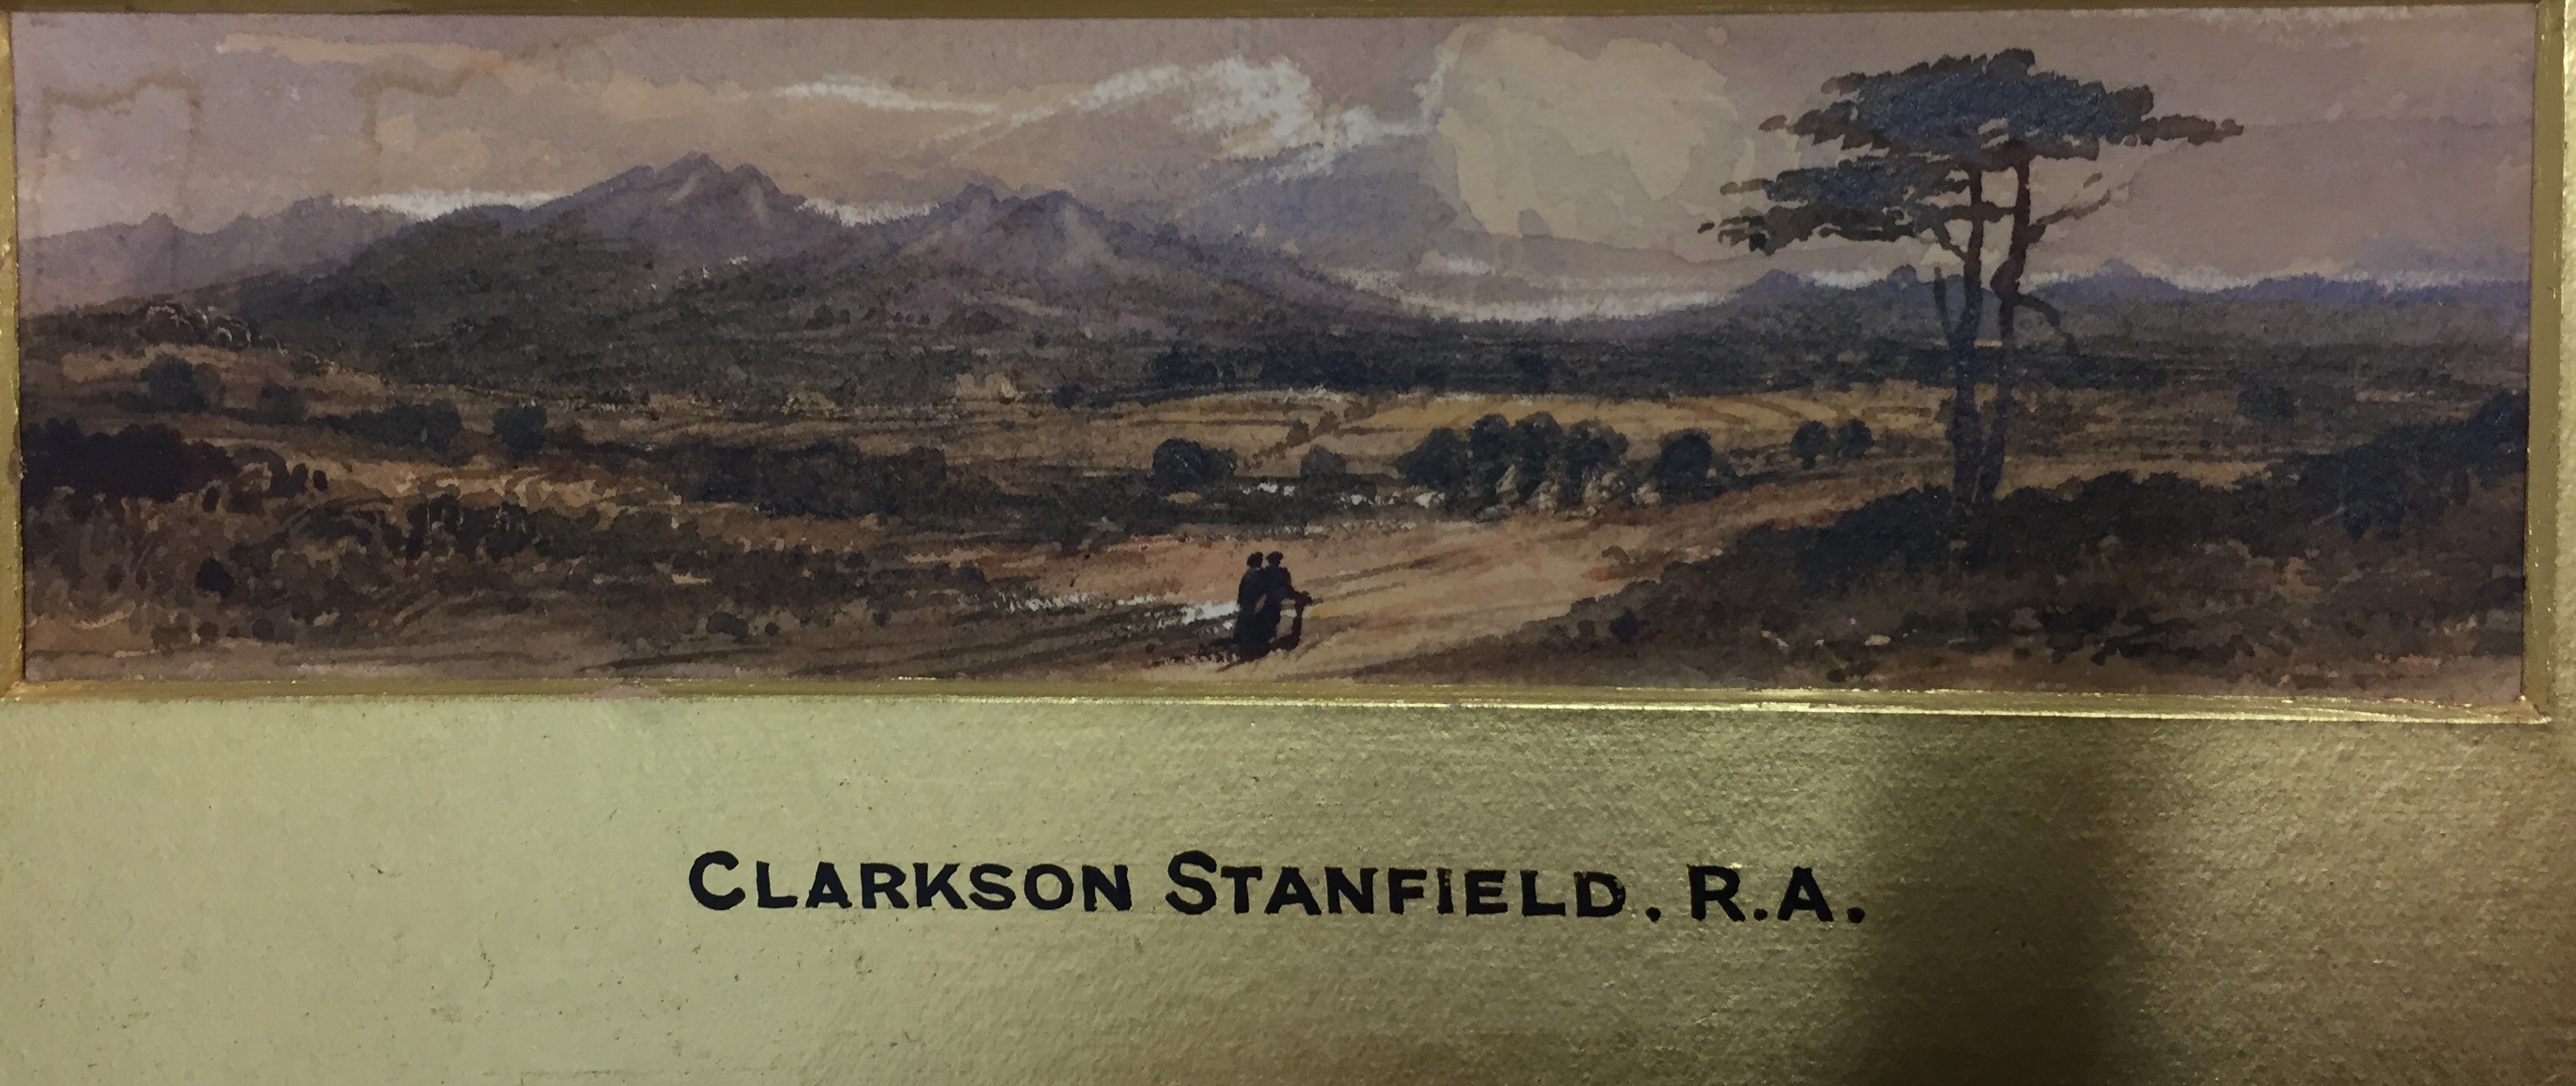 CLARKSON STANFIELD, R.A., WATERCOLOUR Romantic landscape, mounted but unframed, sold together with a - Image 3 of 4